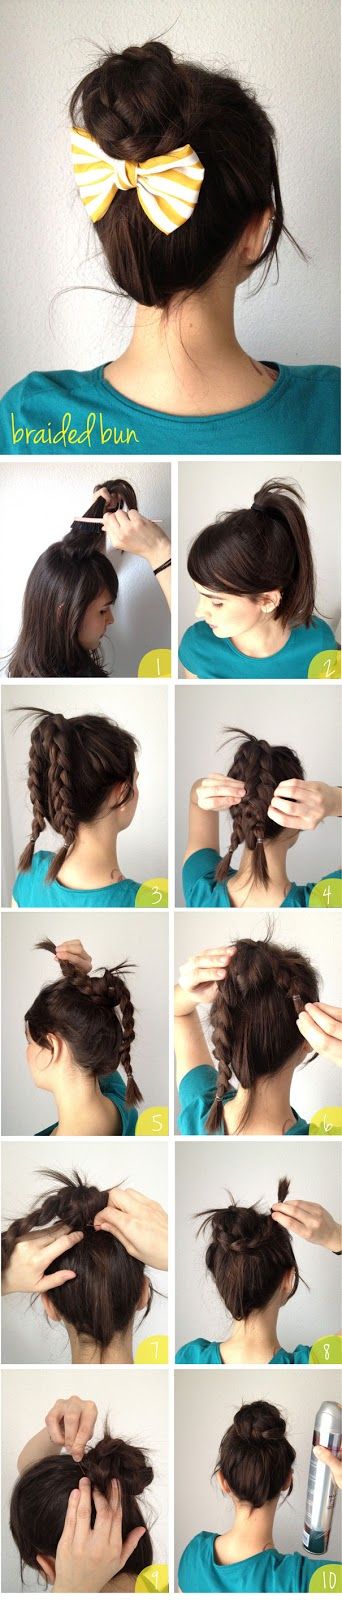 24 MORE TOTALLY PRETTY 10-MINUTE HAIRSTYLES